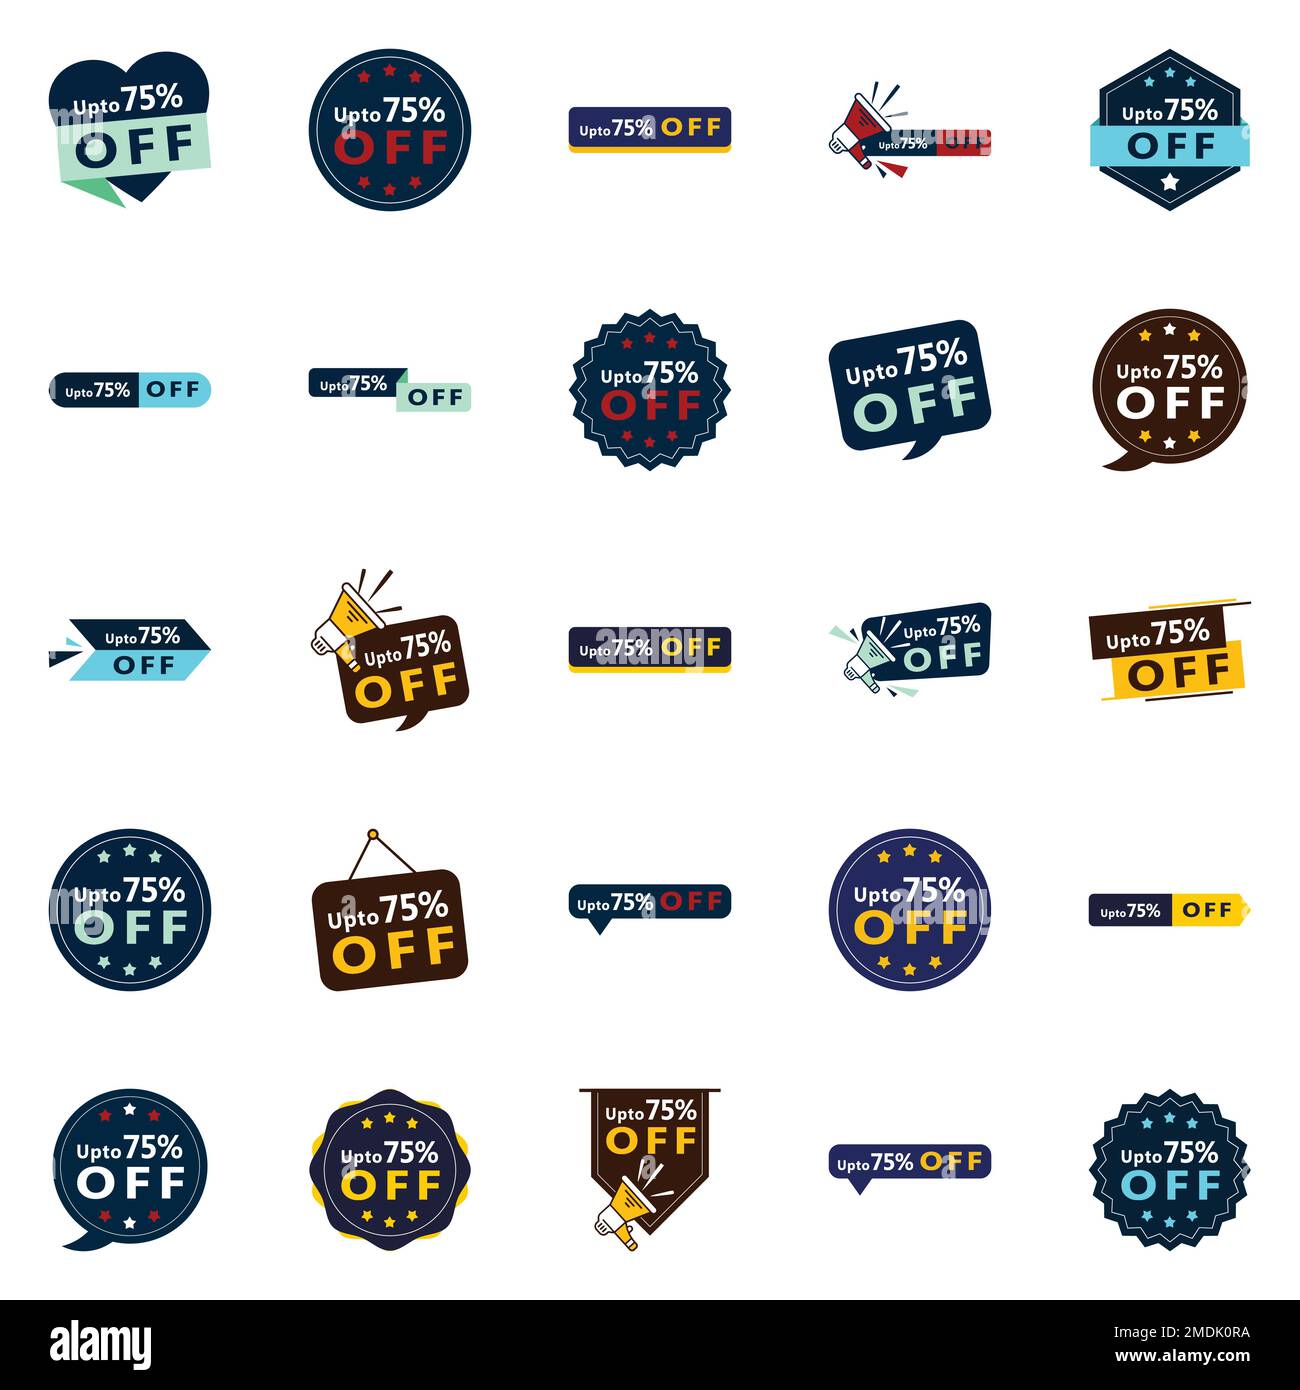 The Up to 70% Off Pack 25 Unique Vector Designs for Your Next Sale ...